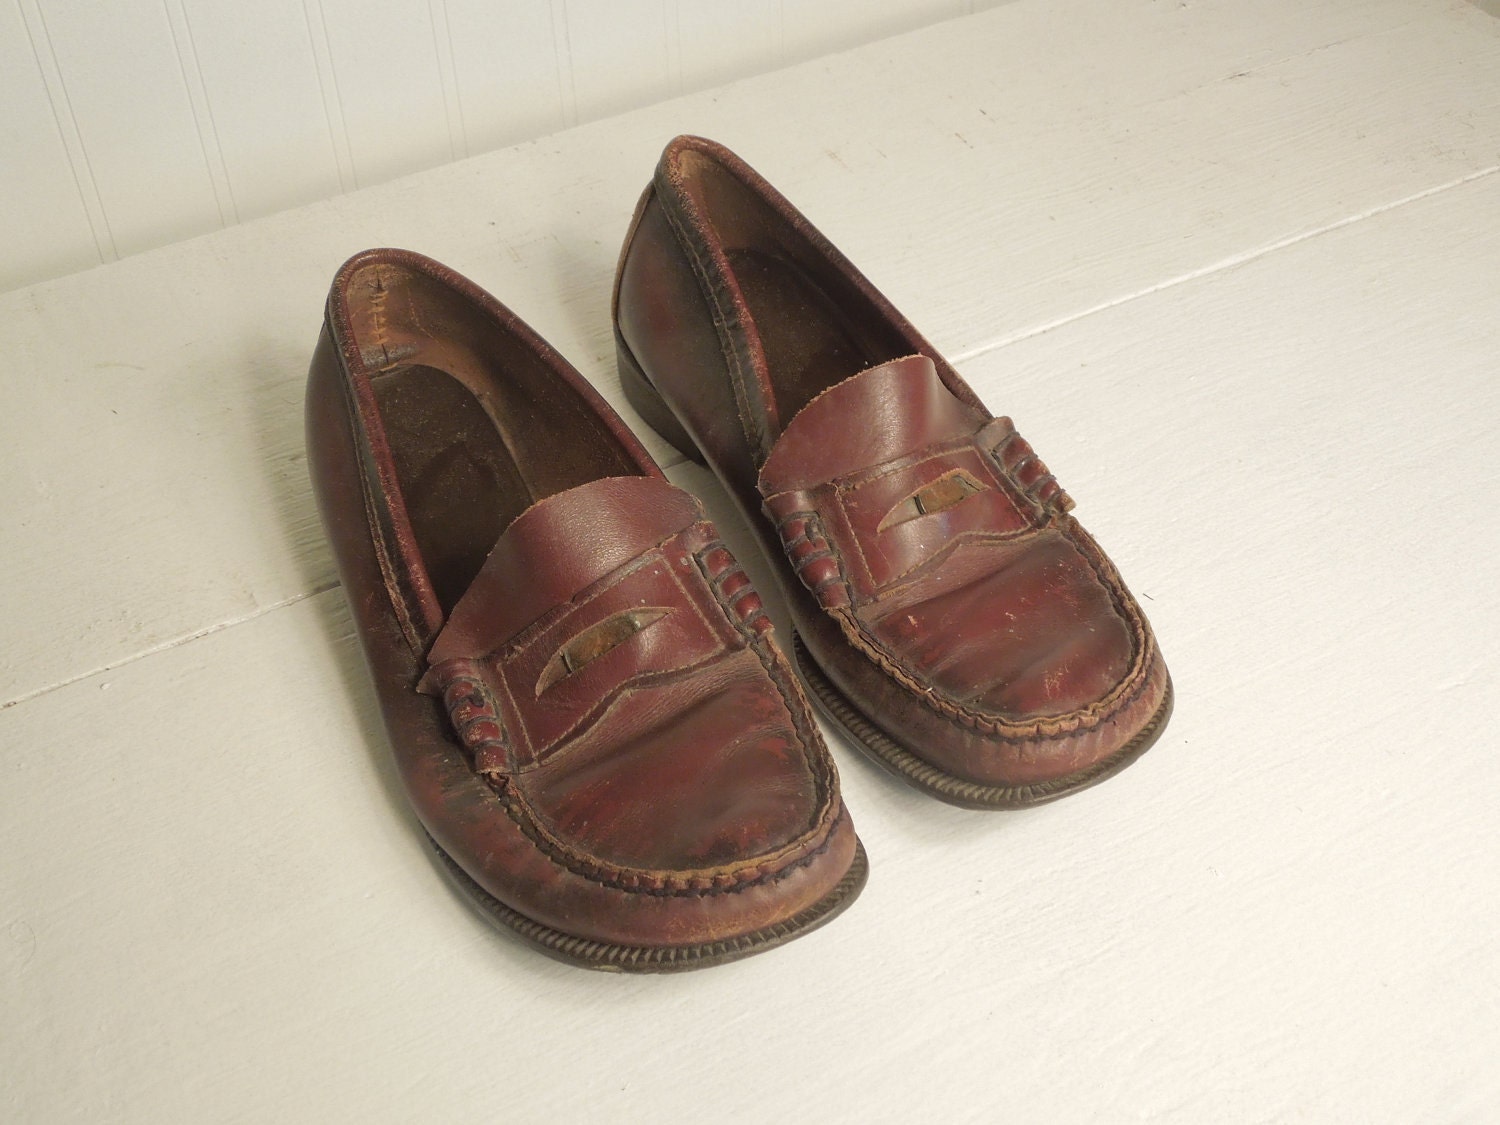 Vintage Penny Loafers by feathertattoo on Etsy